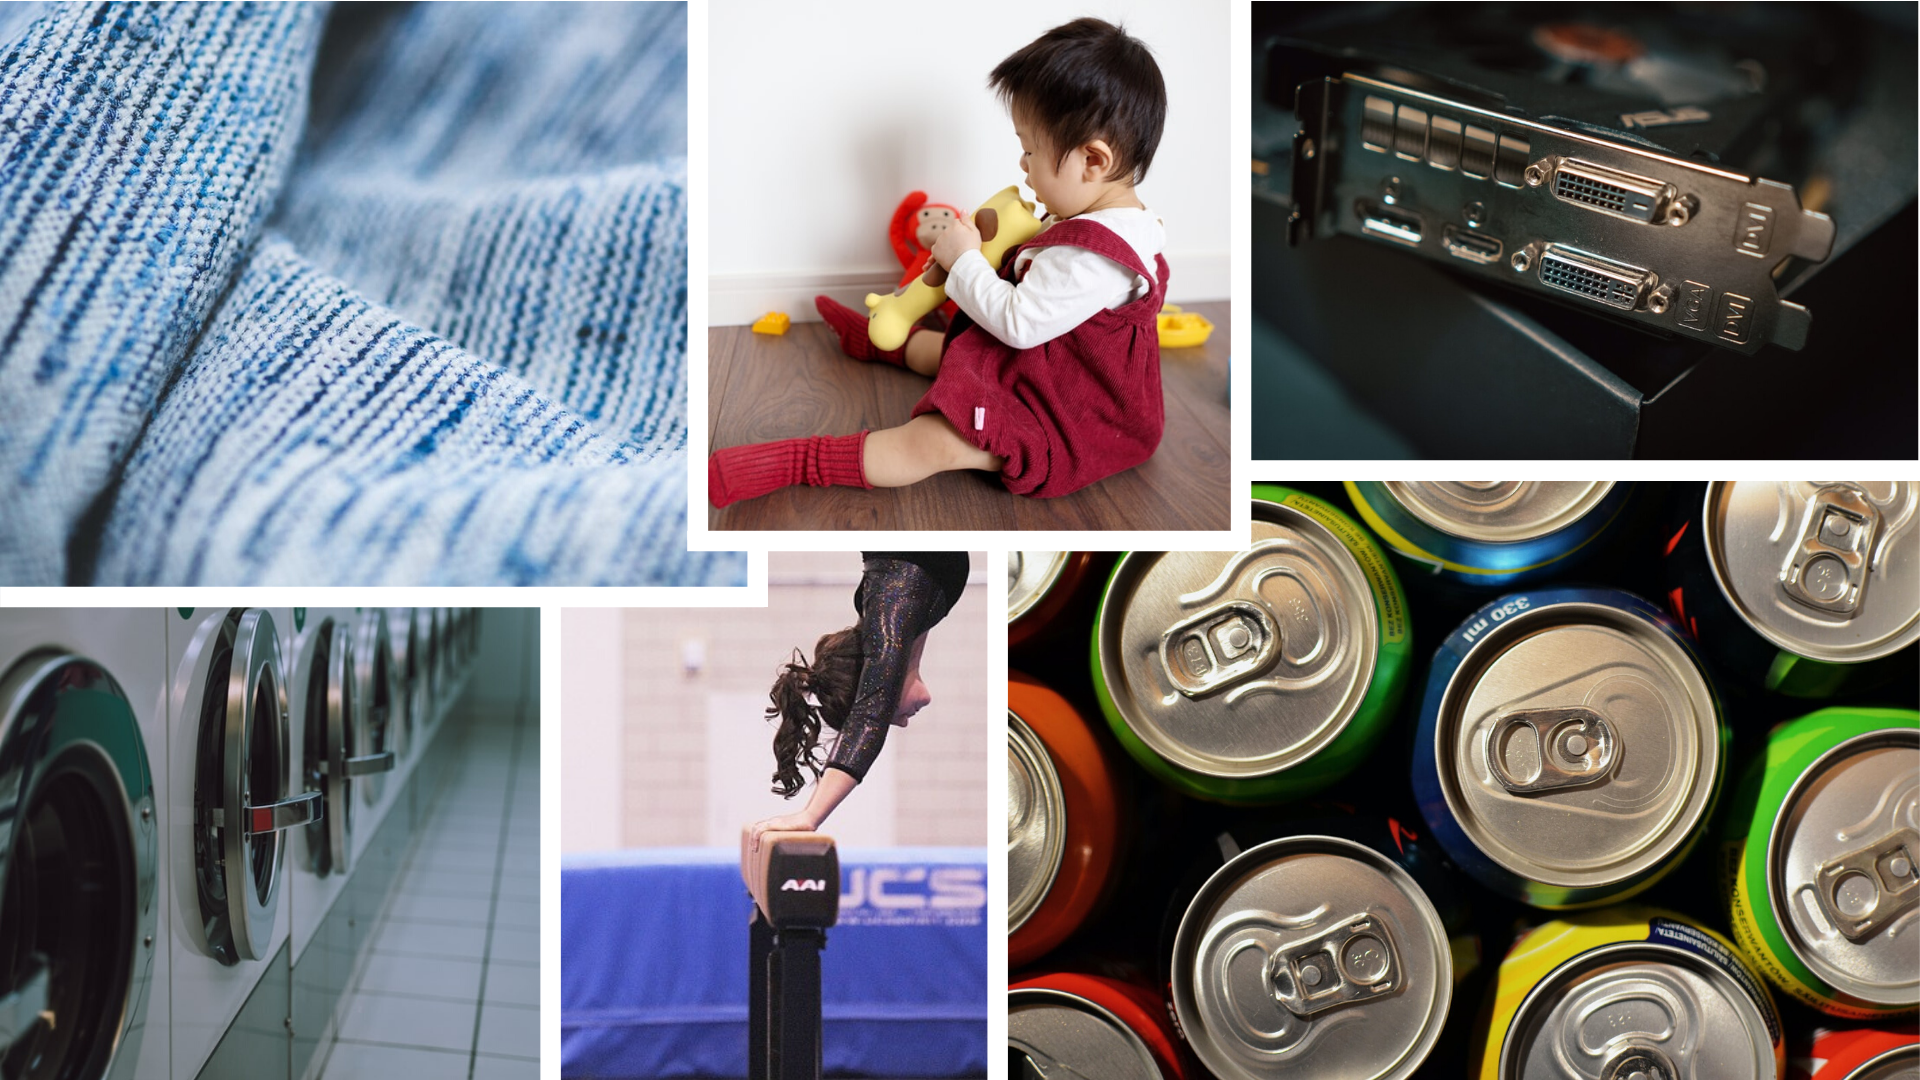 Composite image of fabric, child playing with toy, stereo parts, soda cans, gymnastics beam, and commercial laundromat